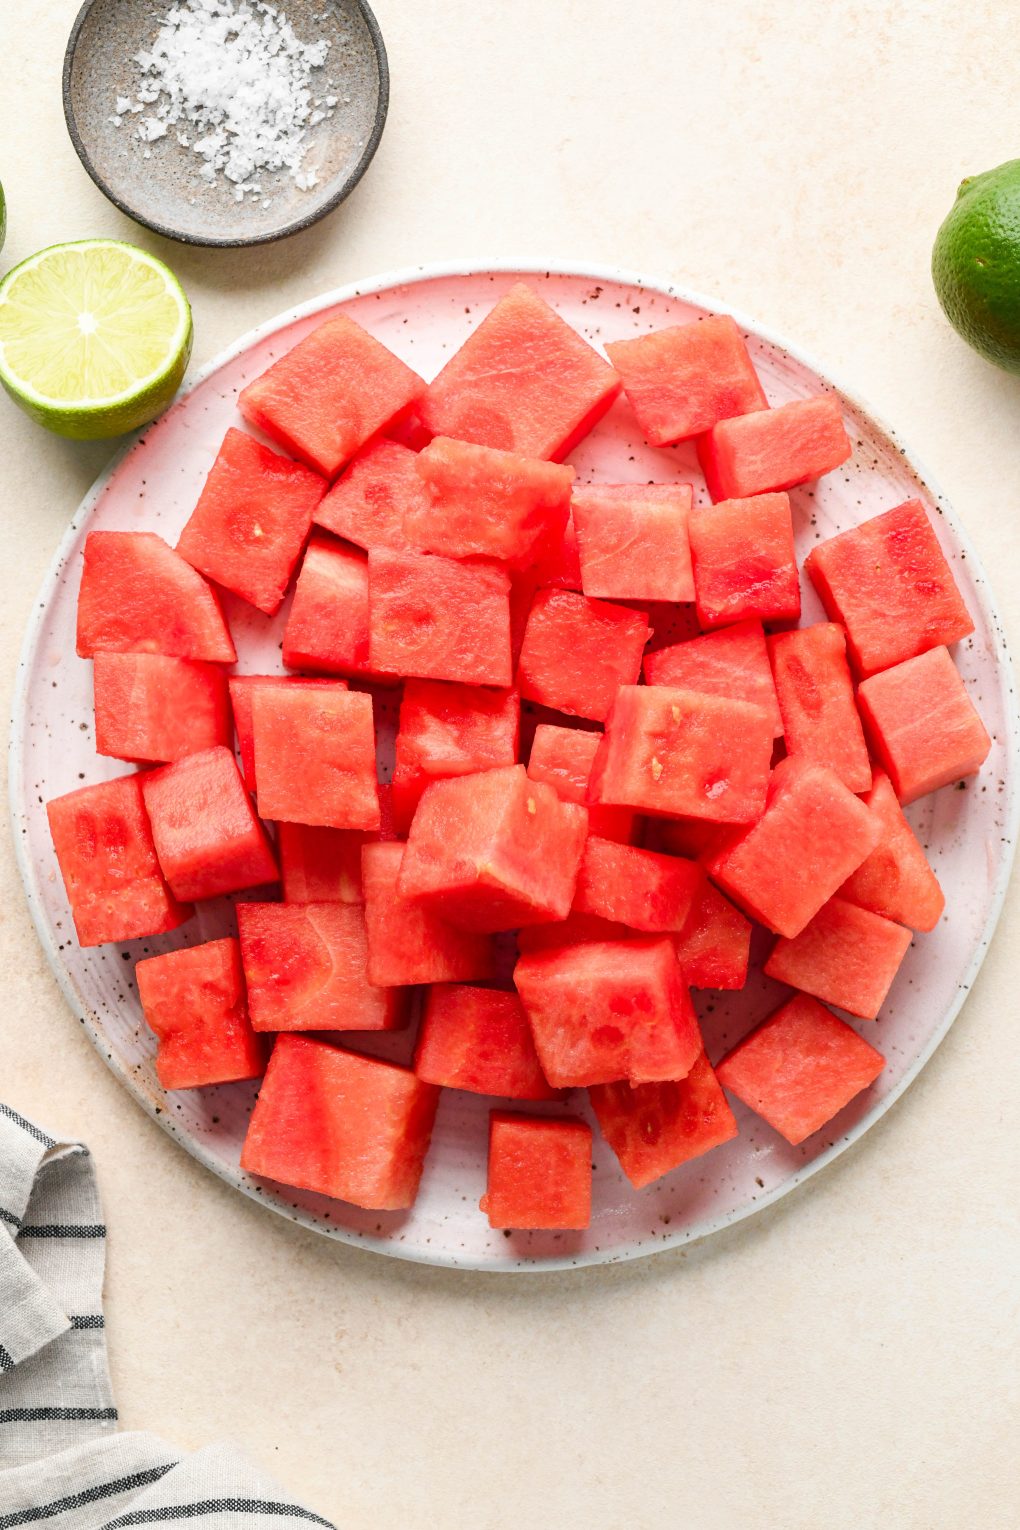 Ingredients for watermelon juice on various sized ceramics.